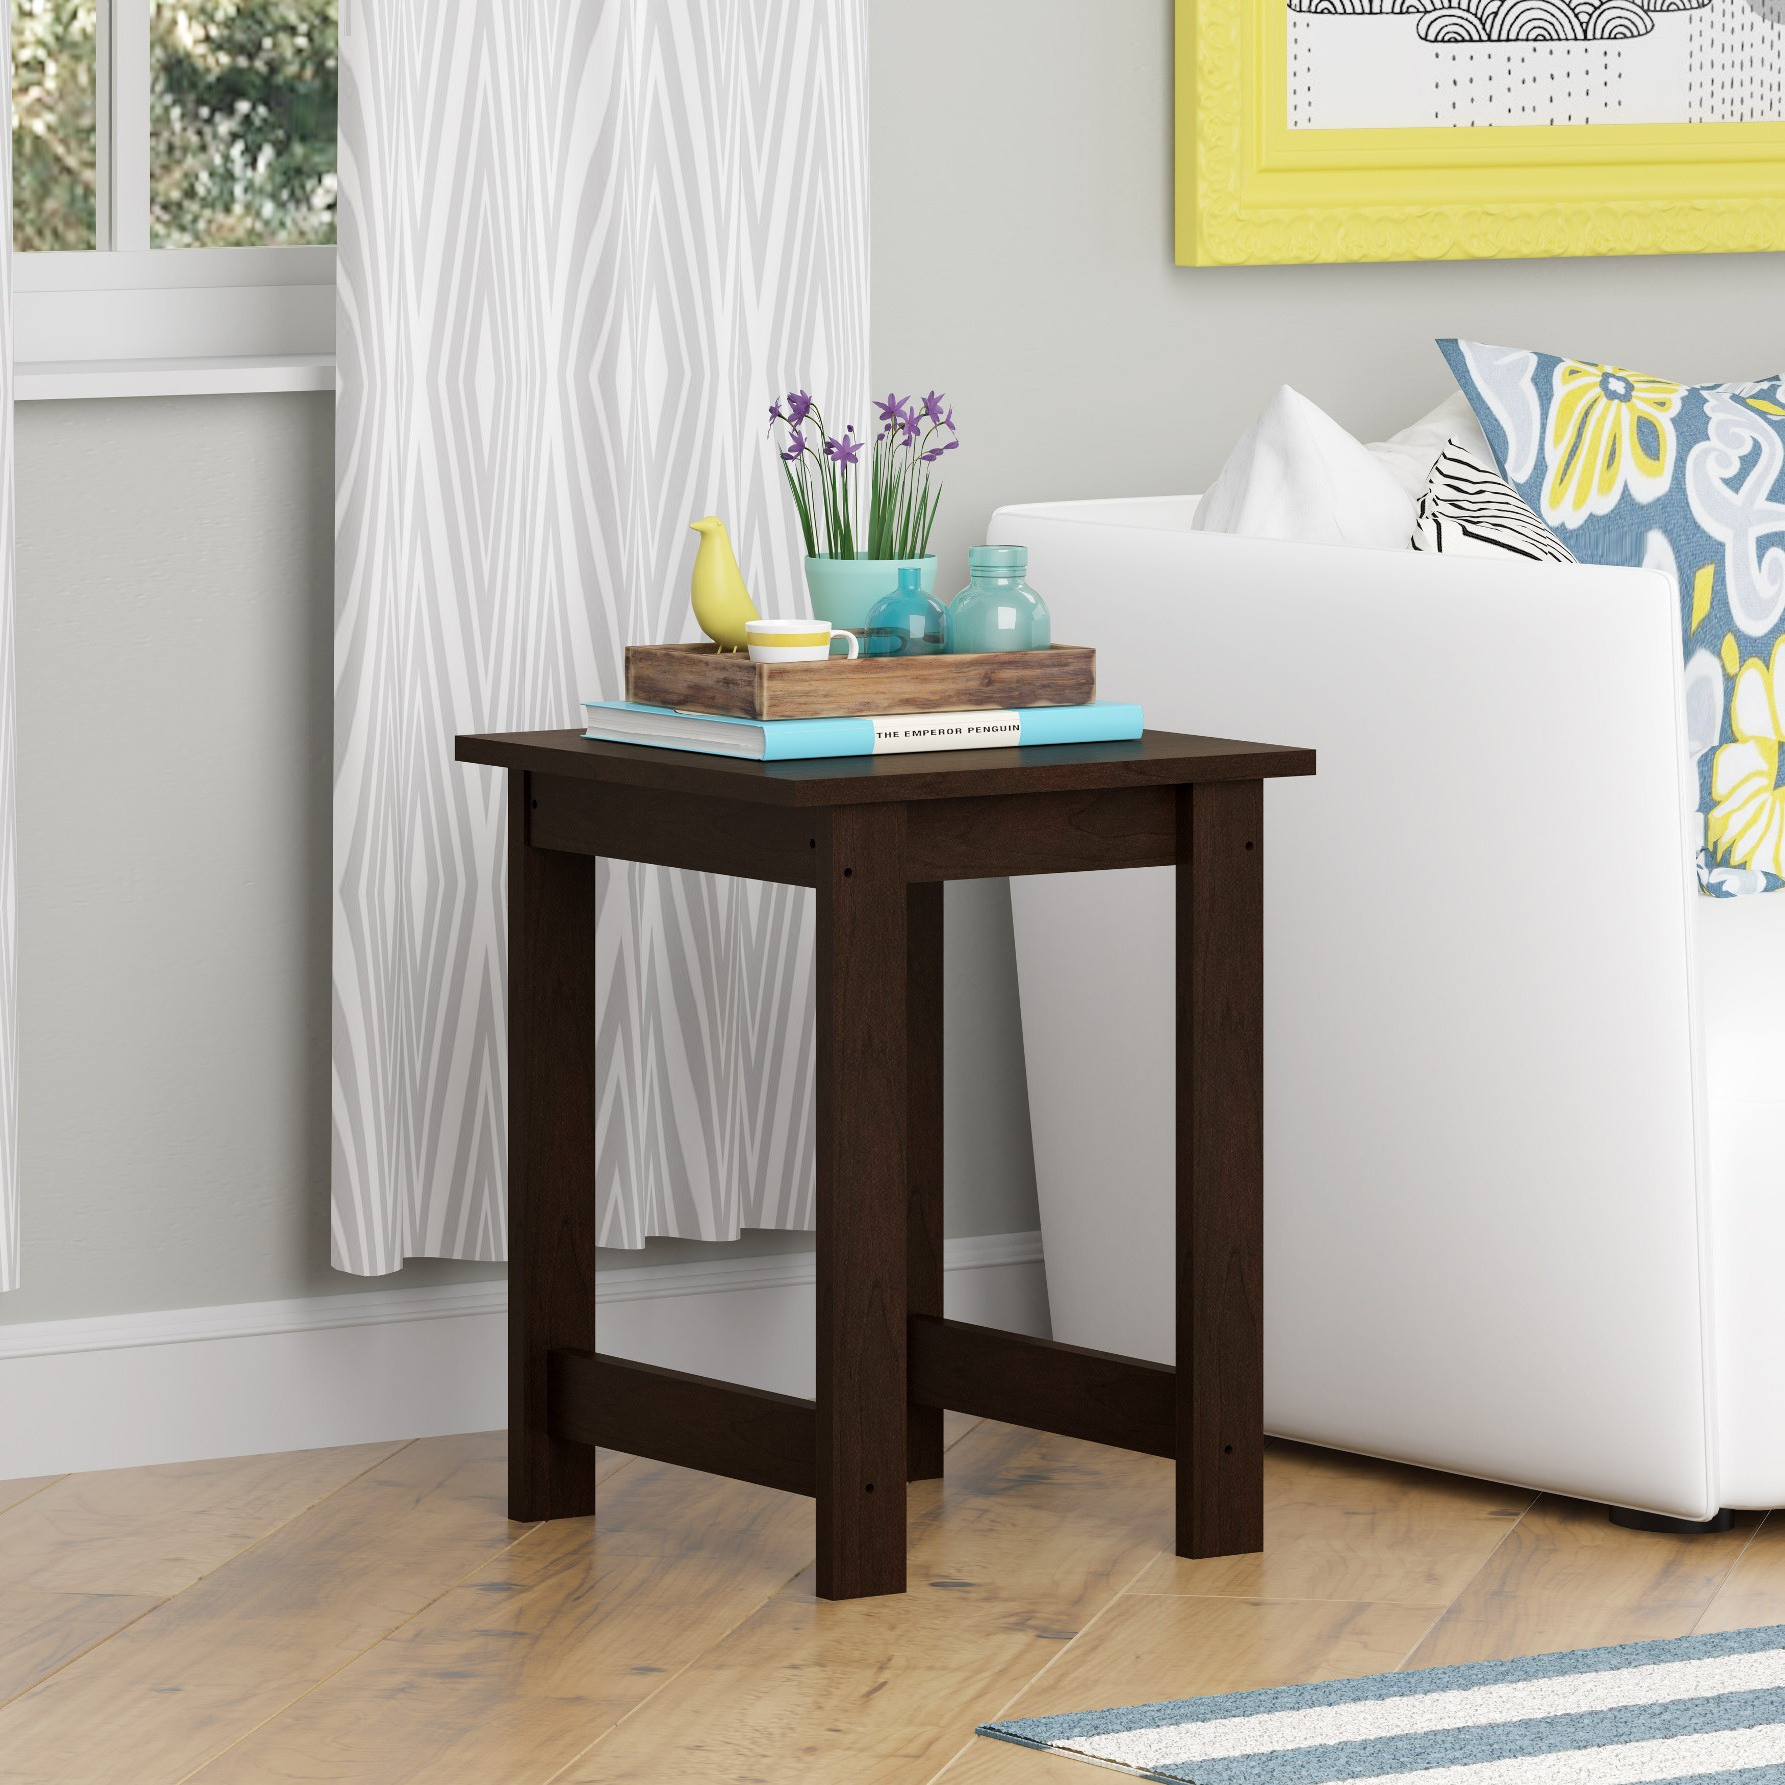 End Tables Living Room
 End Tables for Living Room Living Room Ideas on a Bud